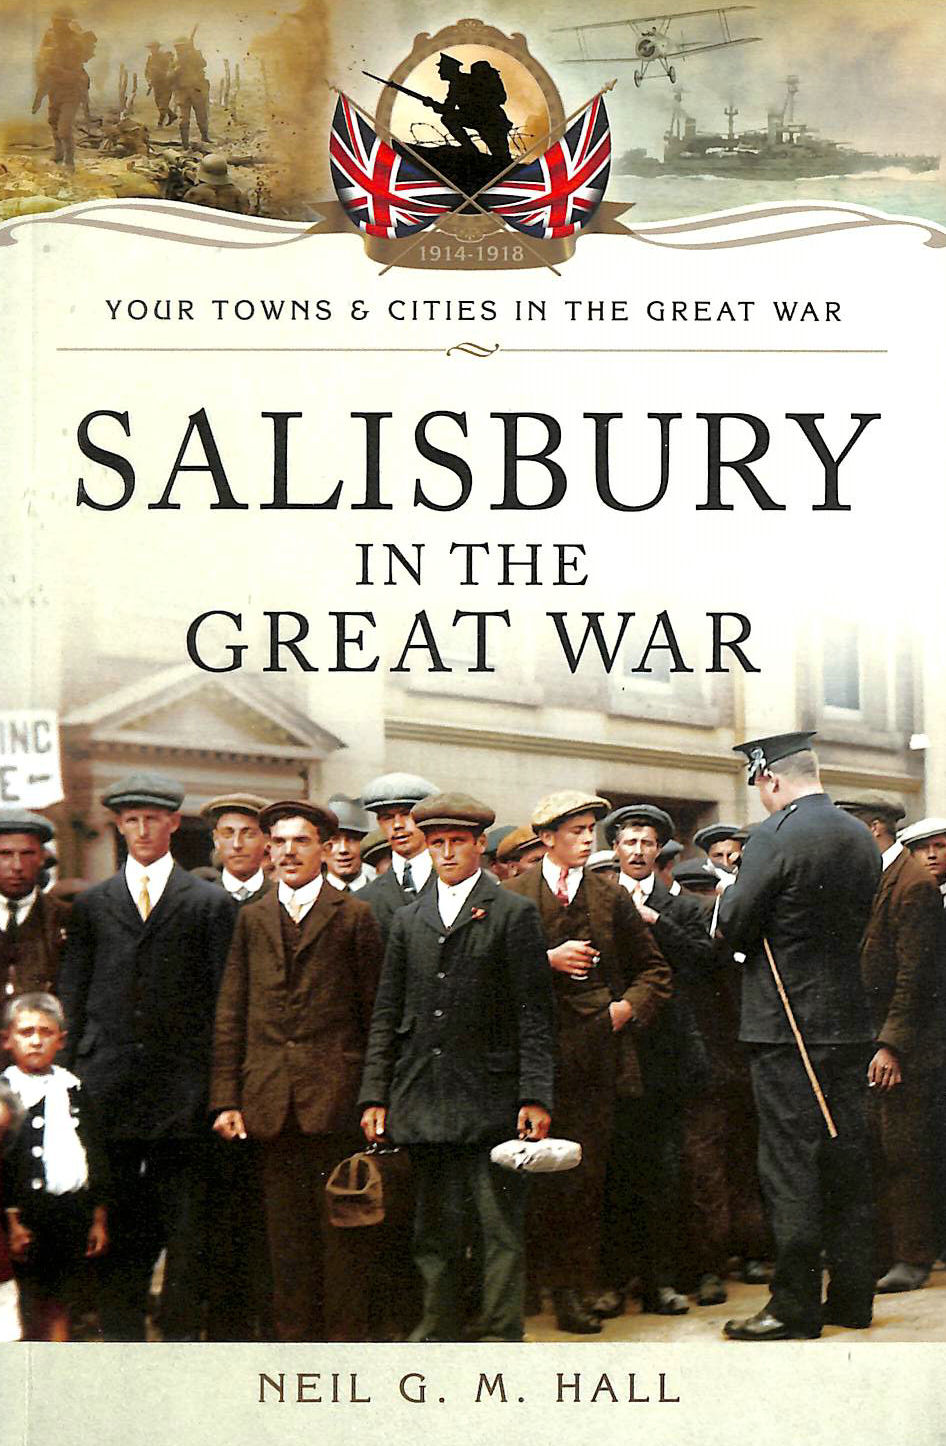 HALL, NEIL G. M. - Salisbury in the Great War (Your Towns and Cities / Great War)